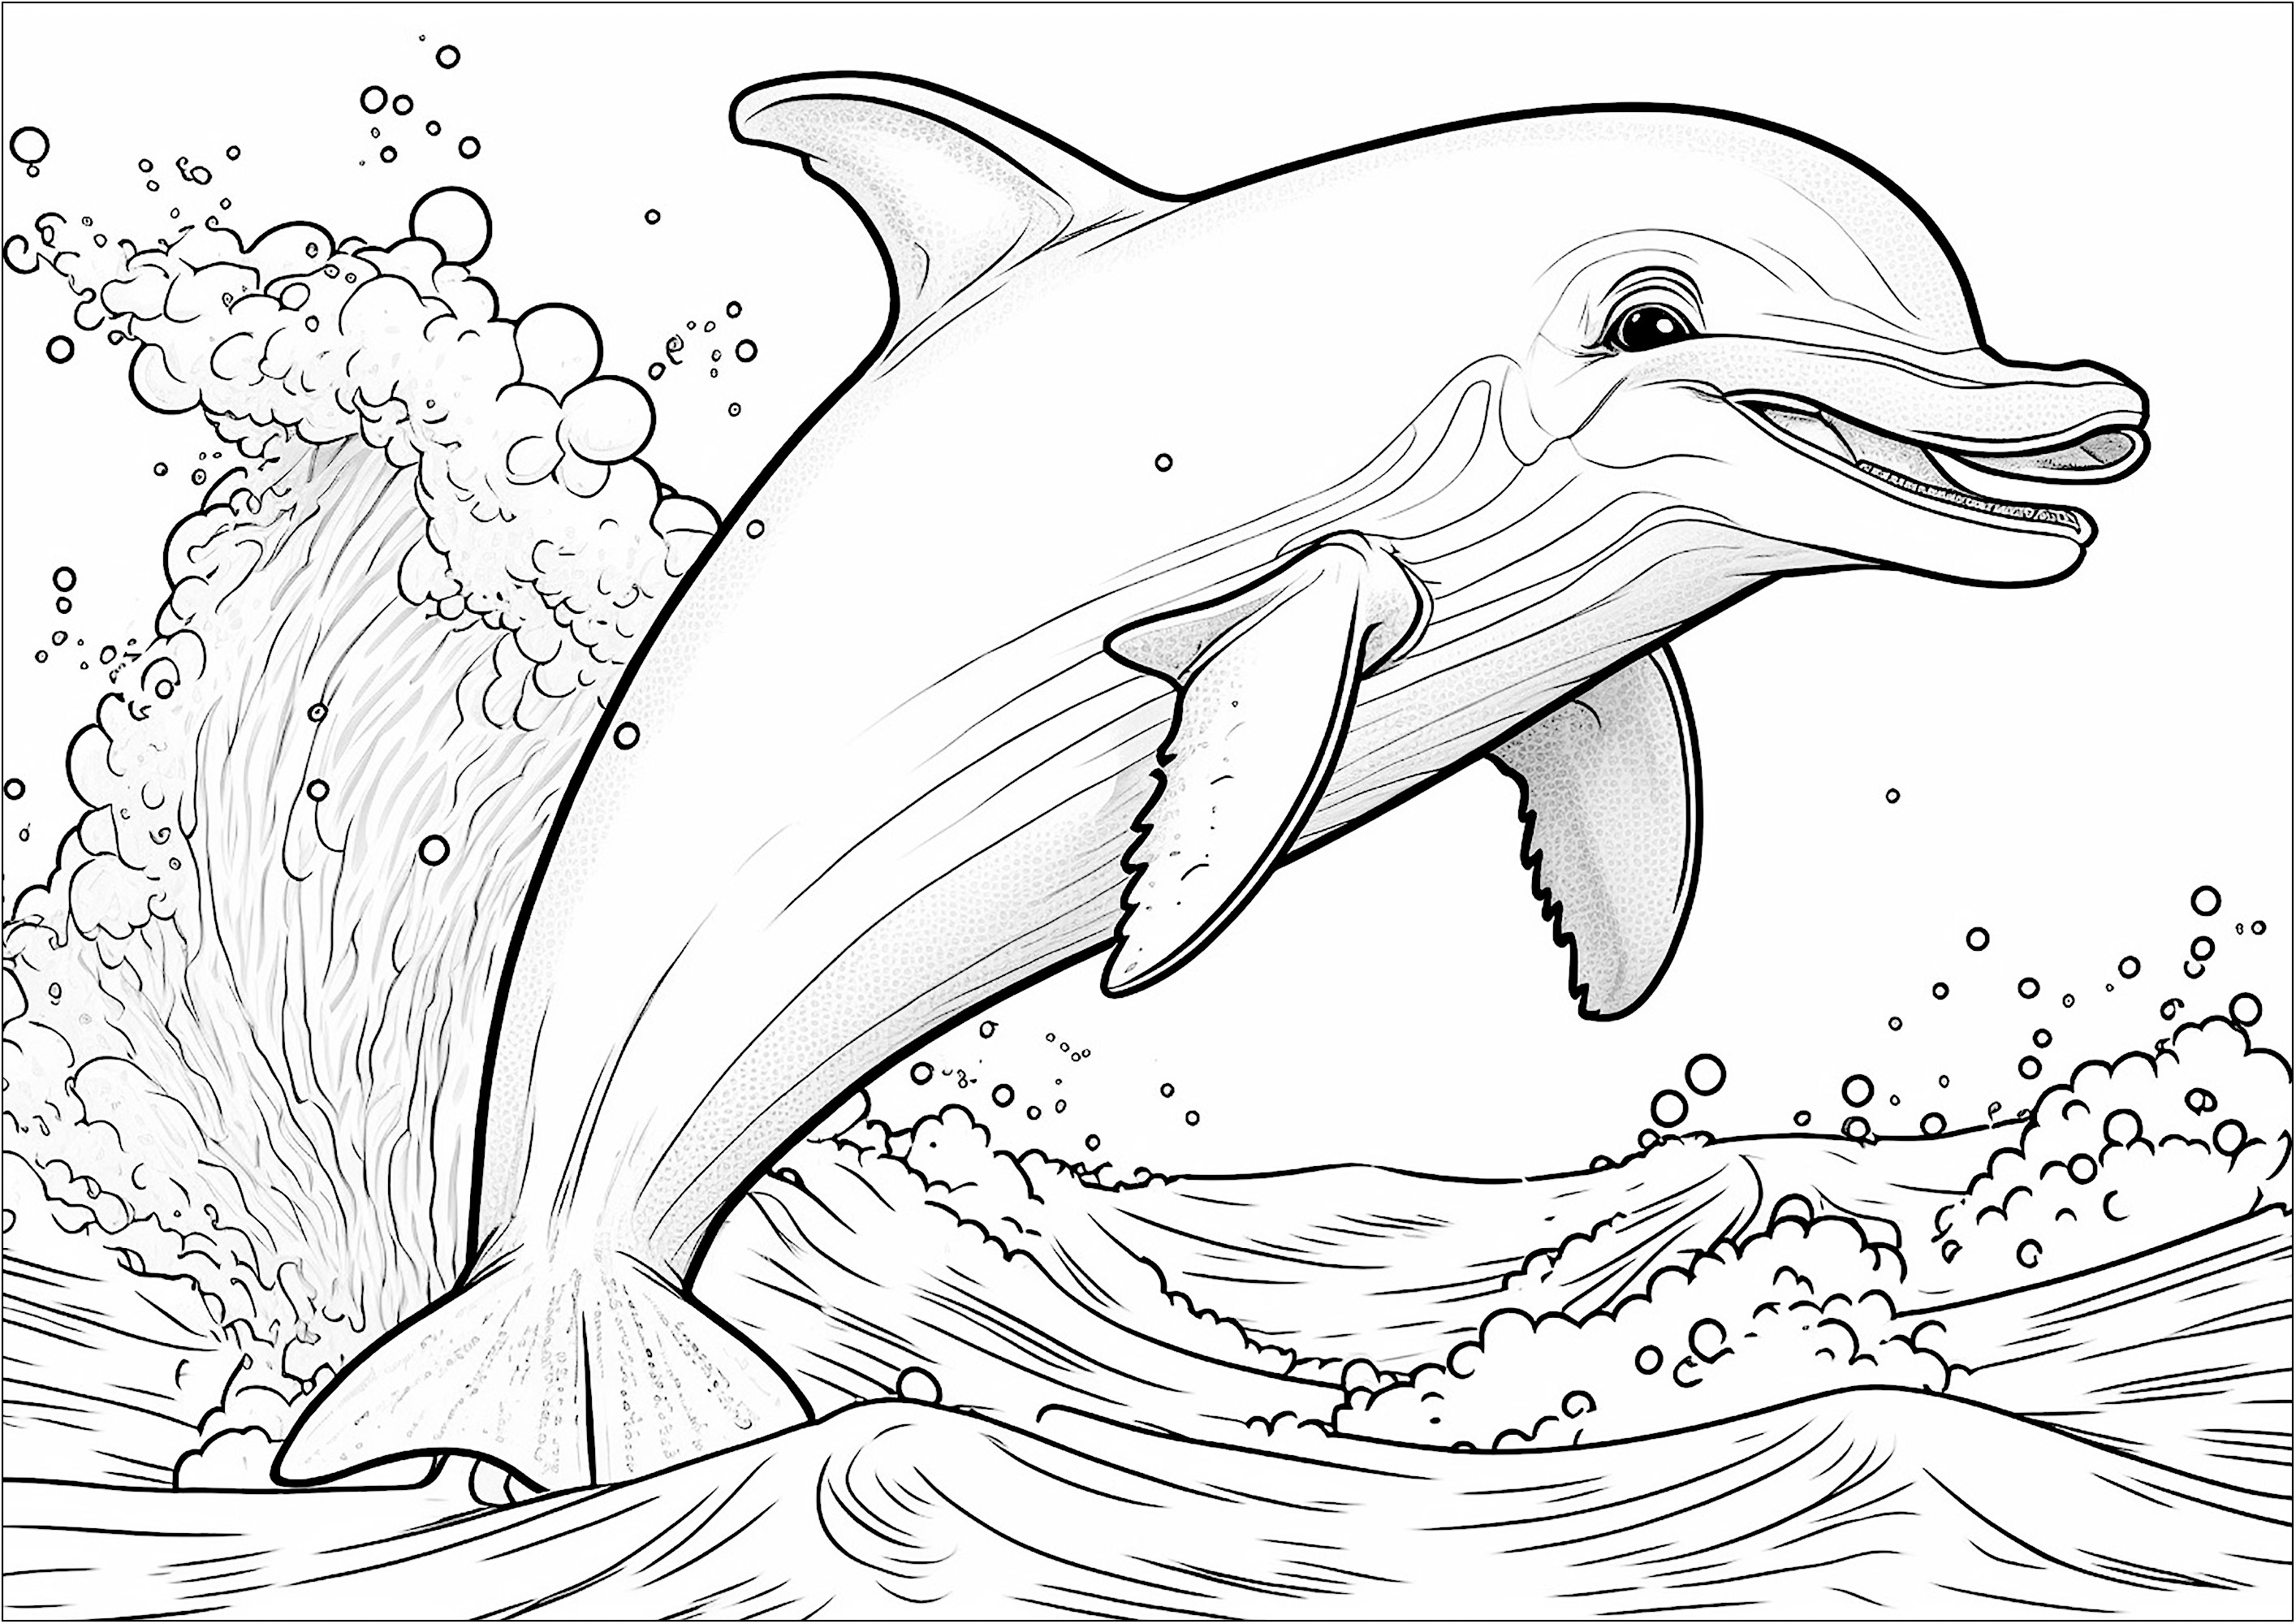 Coloring of a dolphin jumping out of the water. This coloring page is perfect for kids who love marine animals. The design features a smiling dolphin happily jumping out of the water.